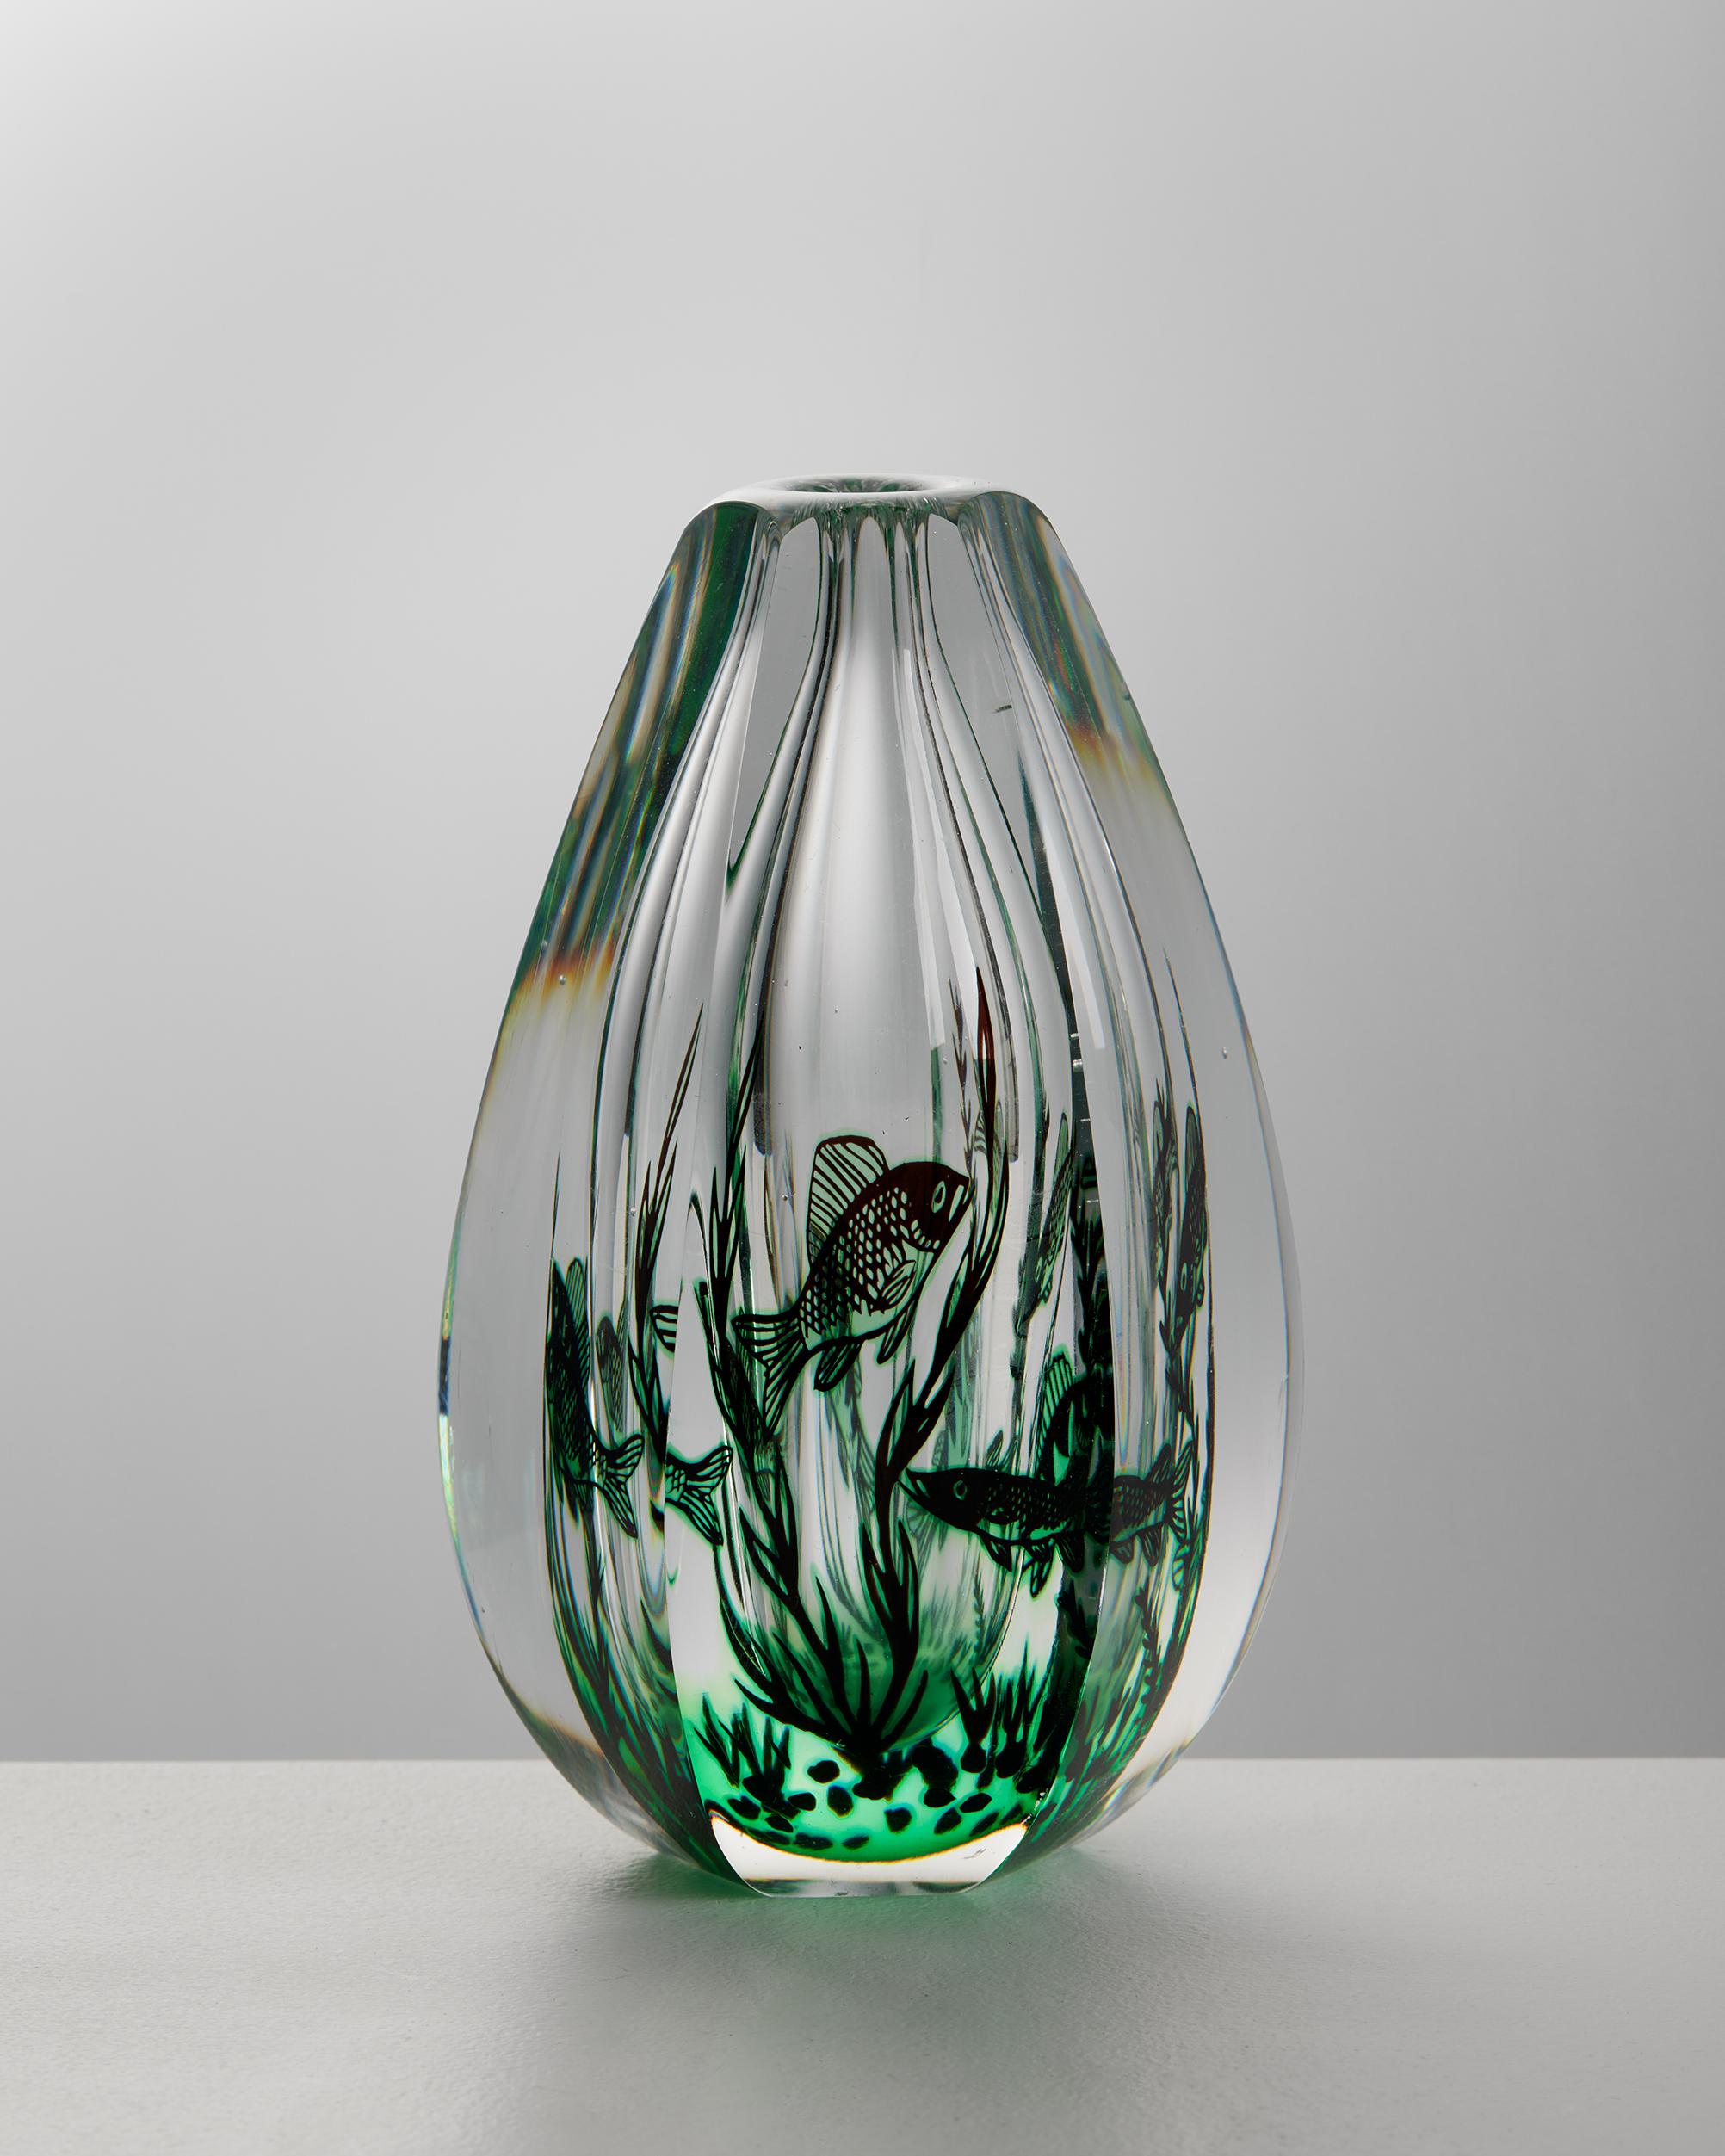 Vase ‘Fish Graal’ designed by Edward Hald for Orrefors,
Sweden, 1949.

Glass.

Signed.

Dimensions: 
H: 16.5 cm / 6 1/2''
Diameter: 9 cm / 3 1/2''

Edward Hald (1883 – 1980) is one of the well-known Swedish glass artists who have worked for